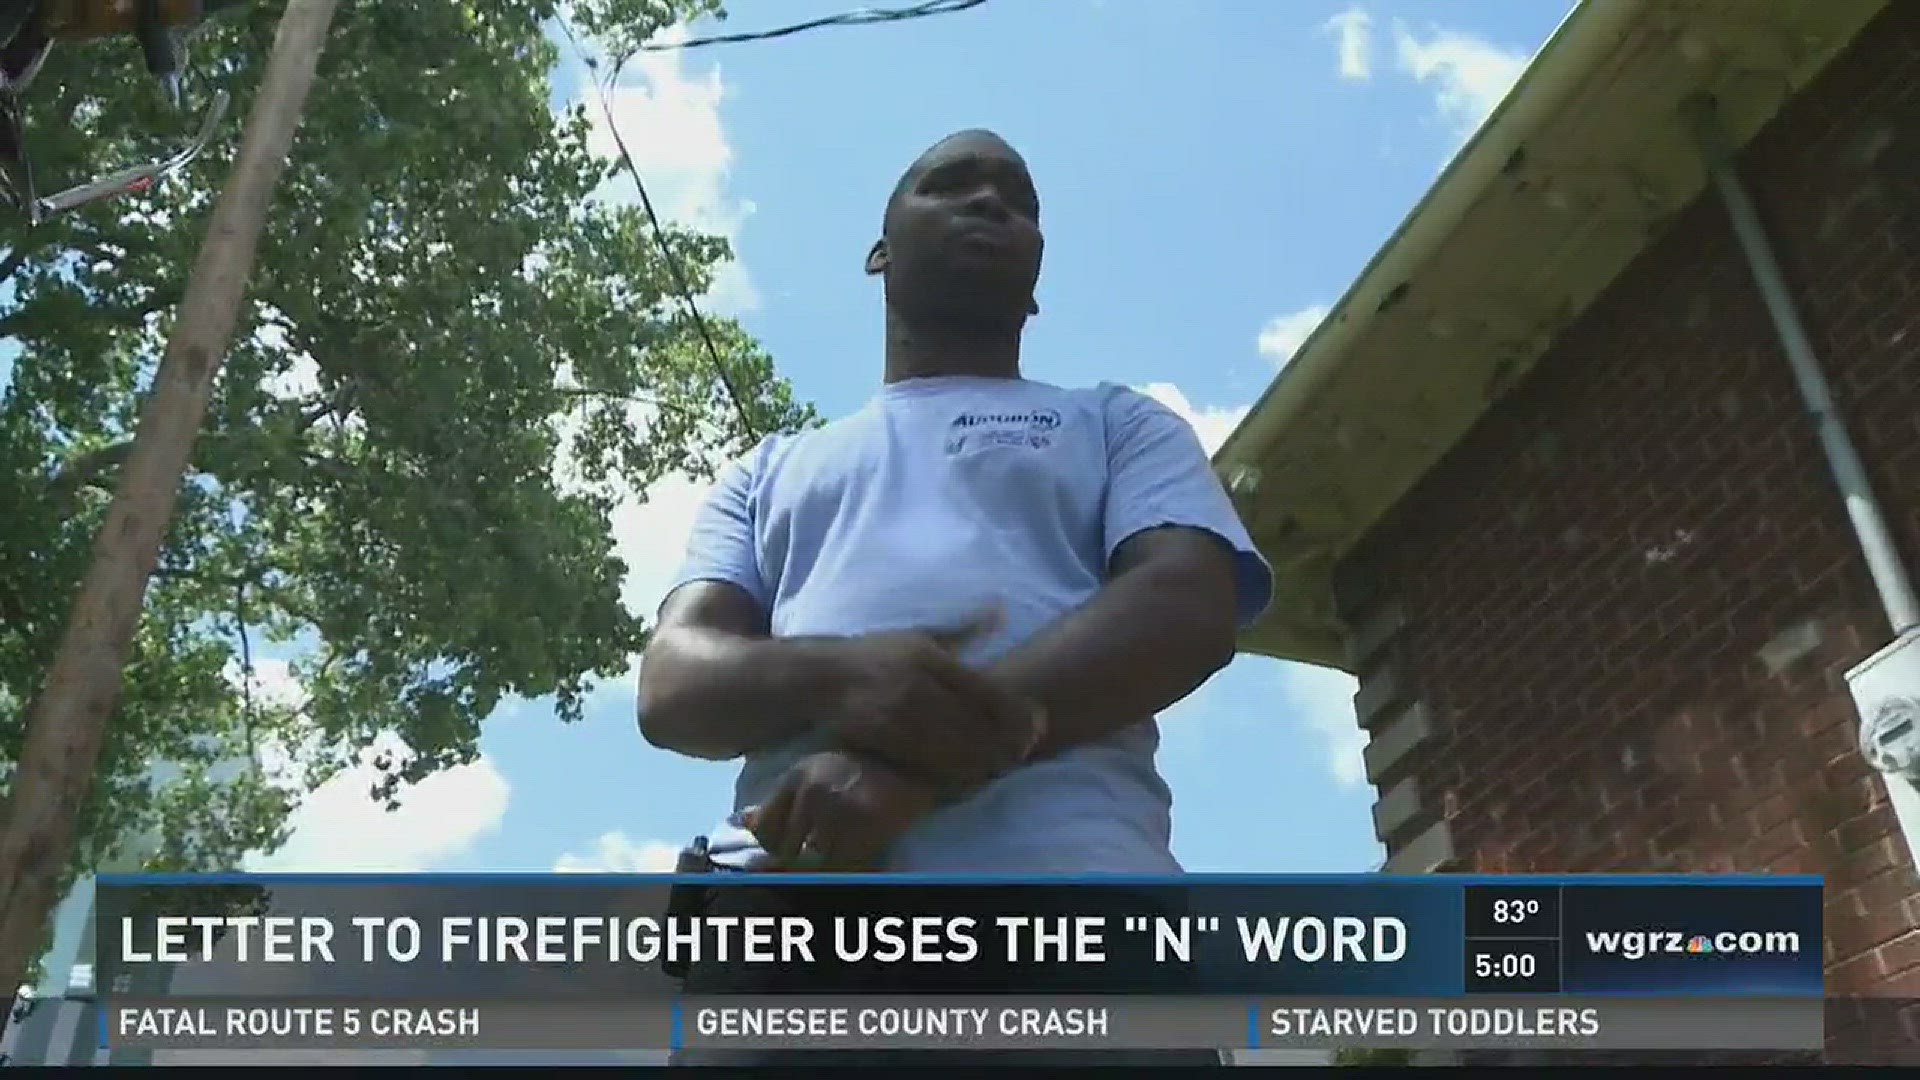 Letter To Firefighter Uses The "N" Word